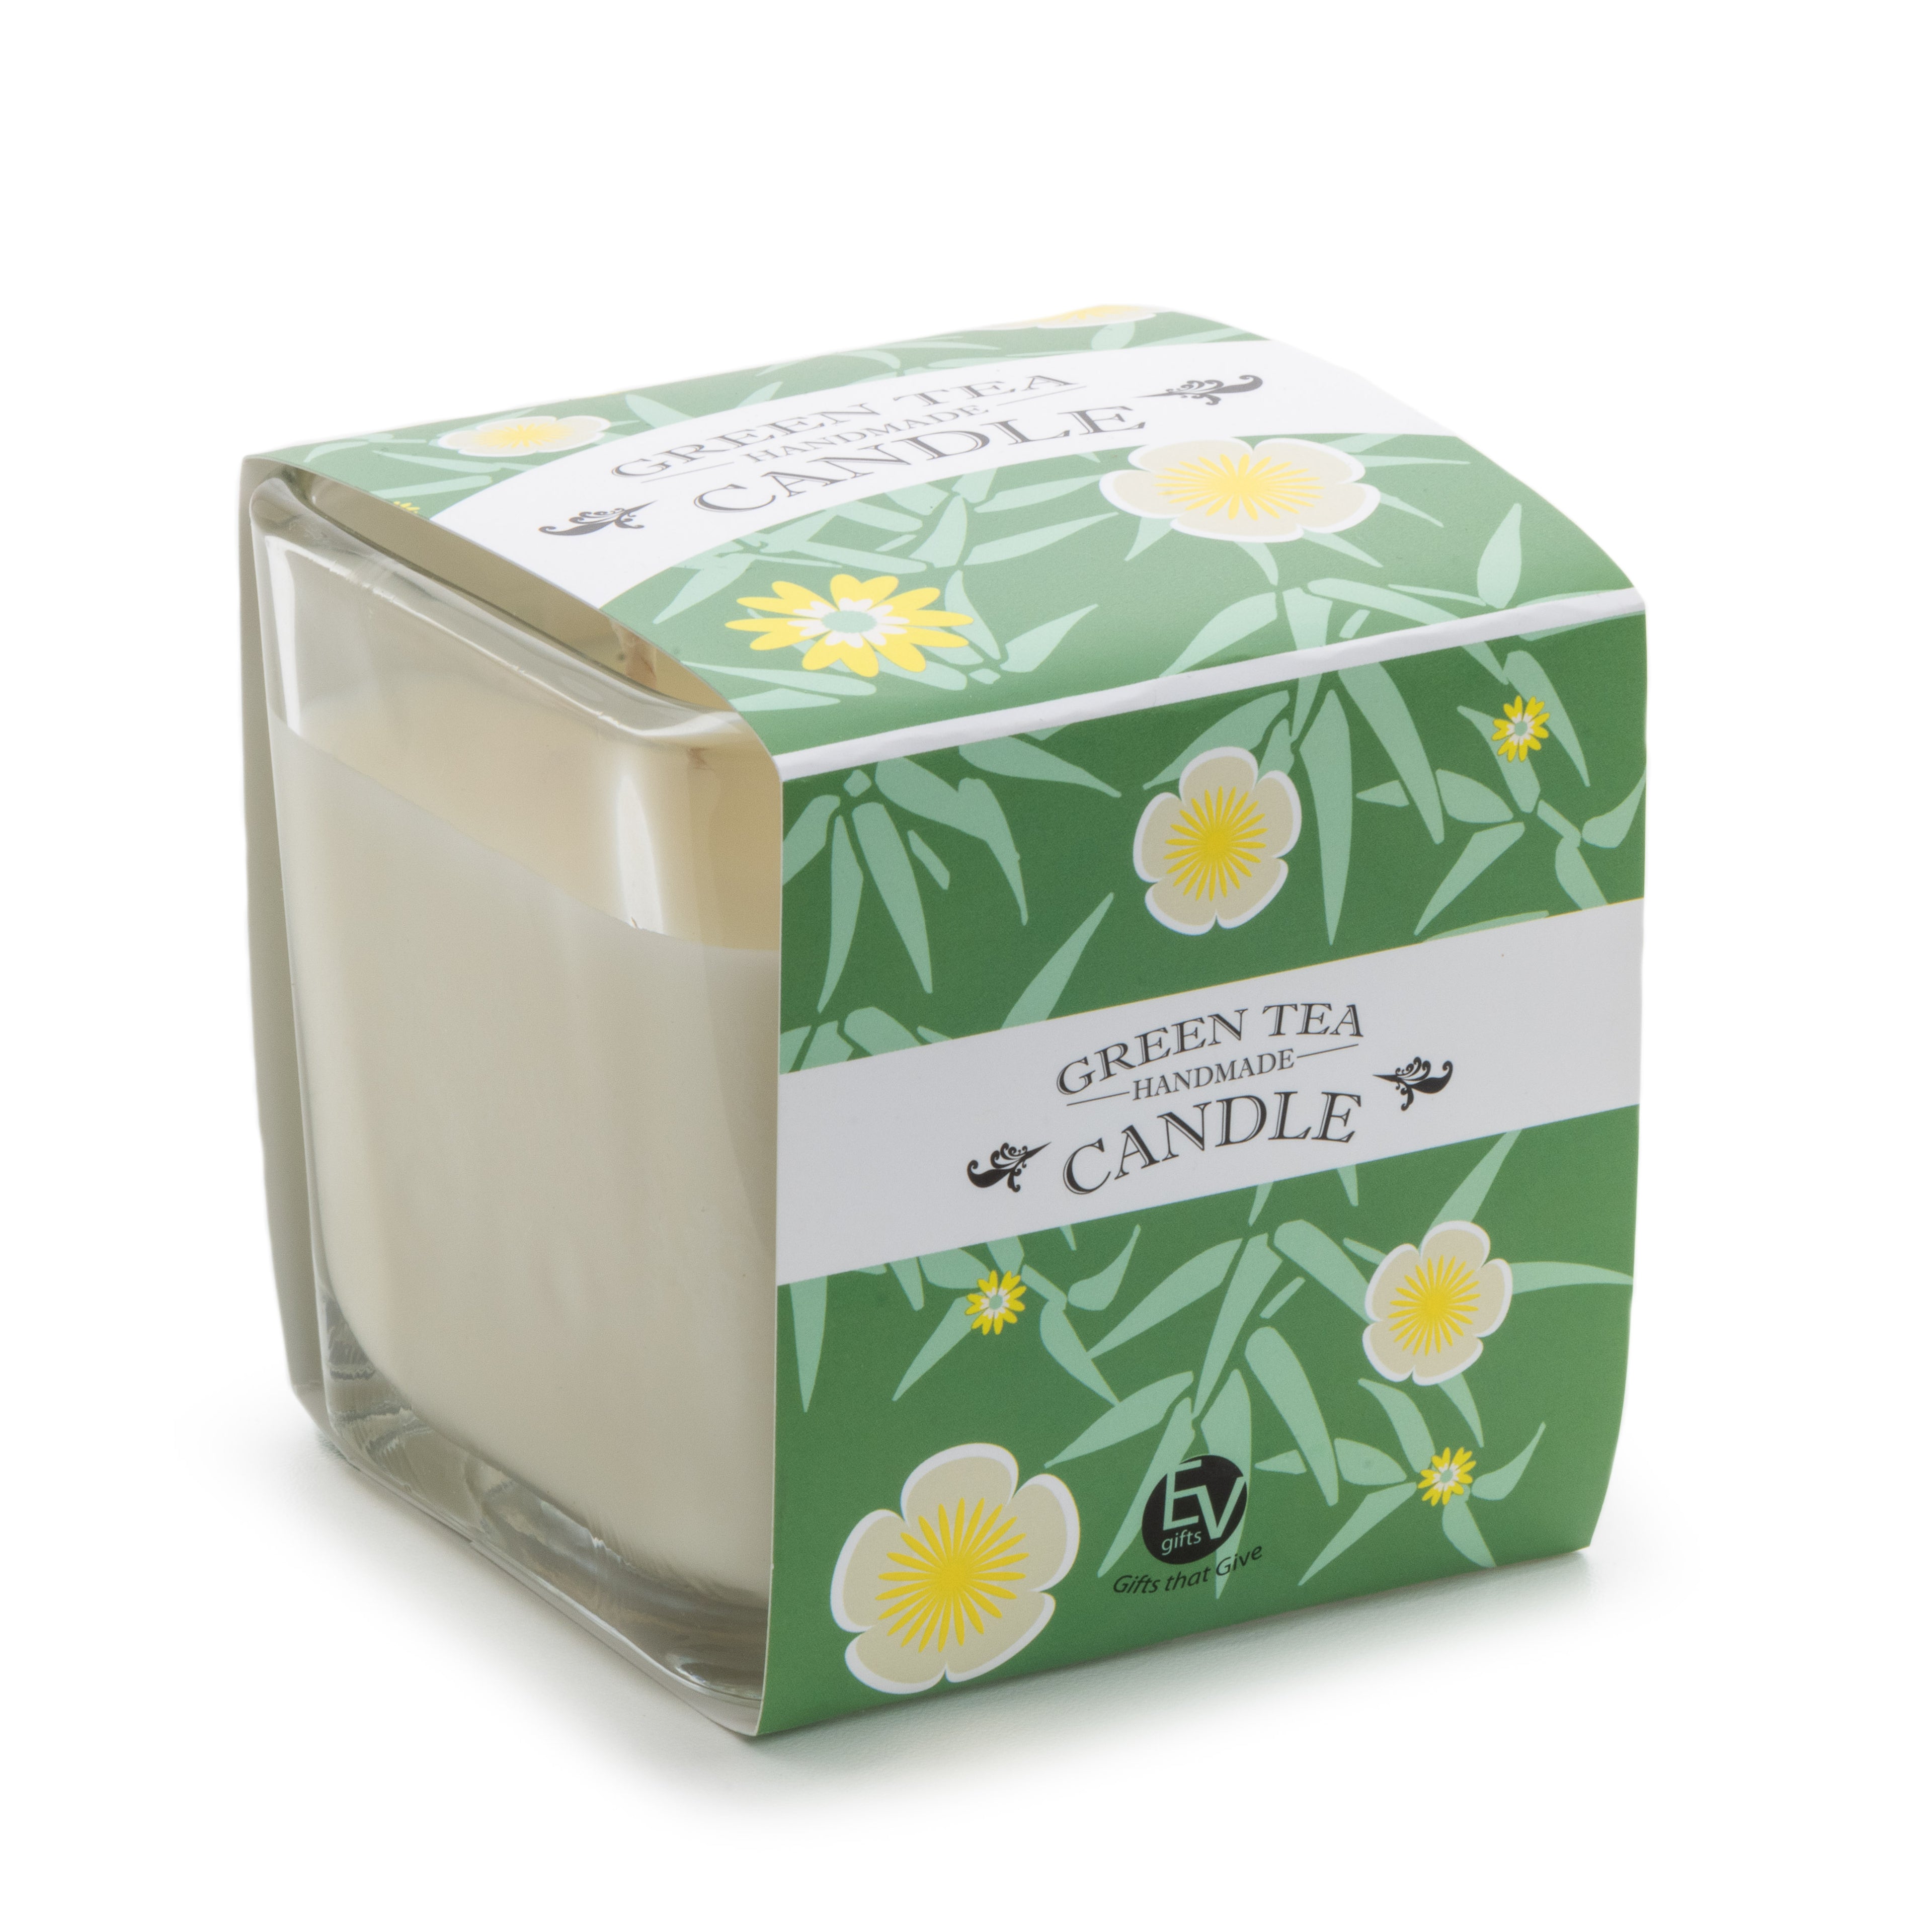 Green Tea Soy Candle, Double Wick